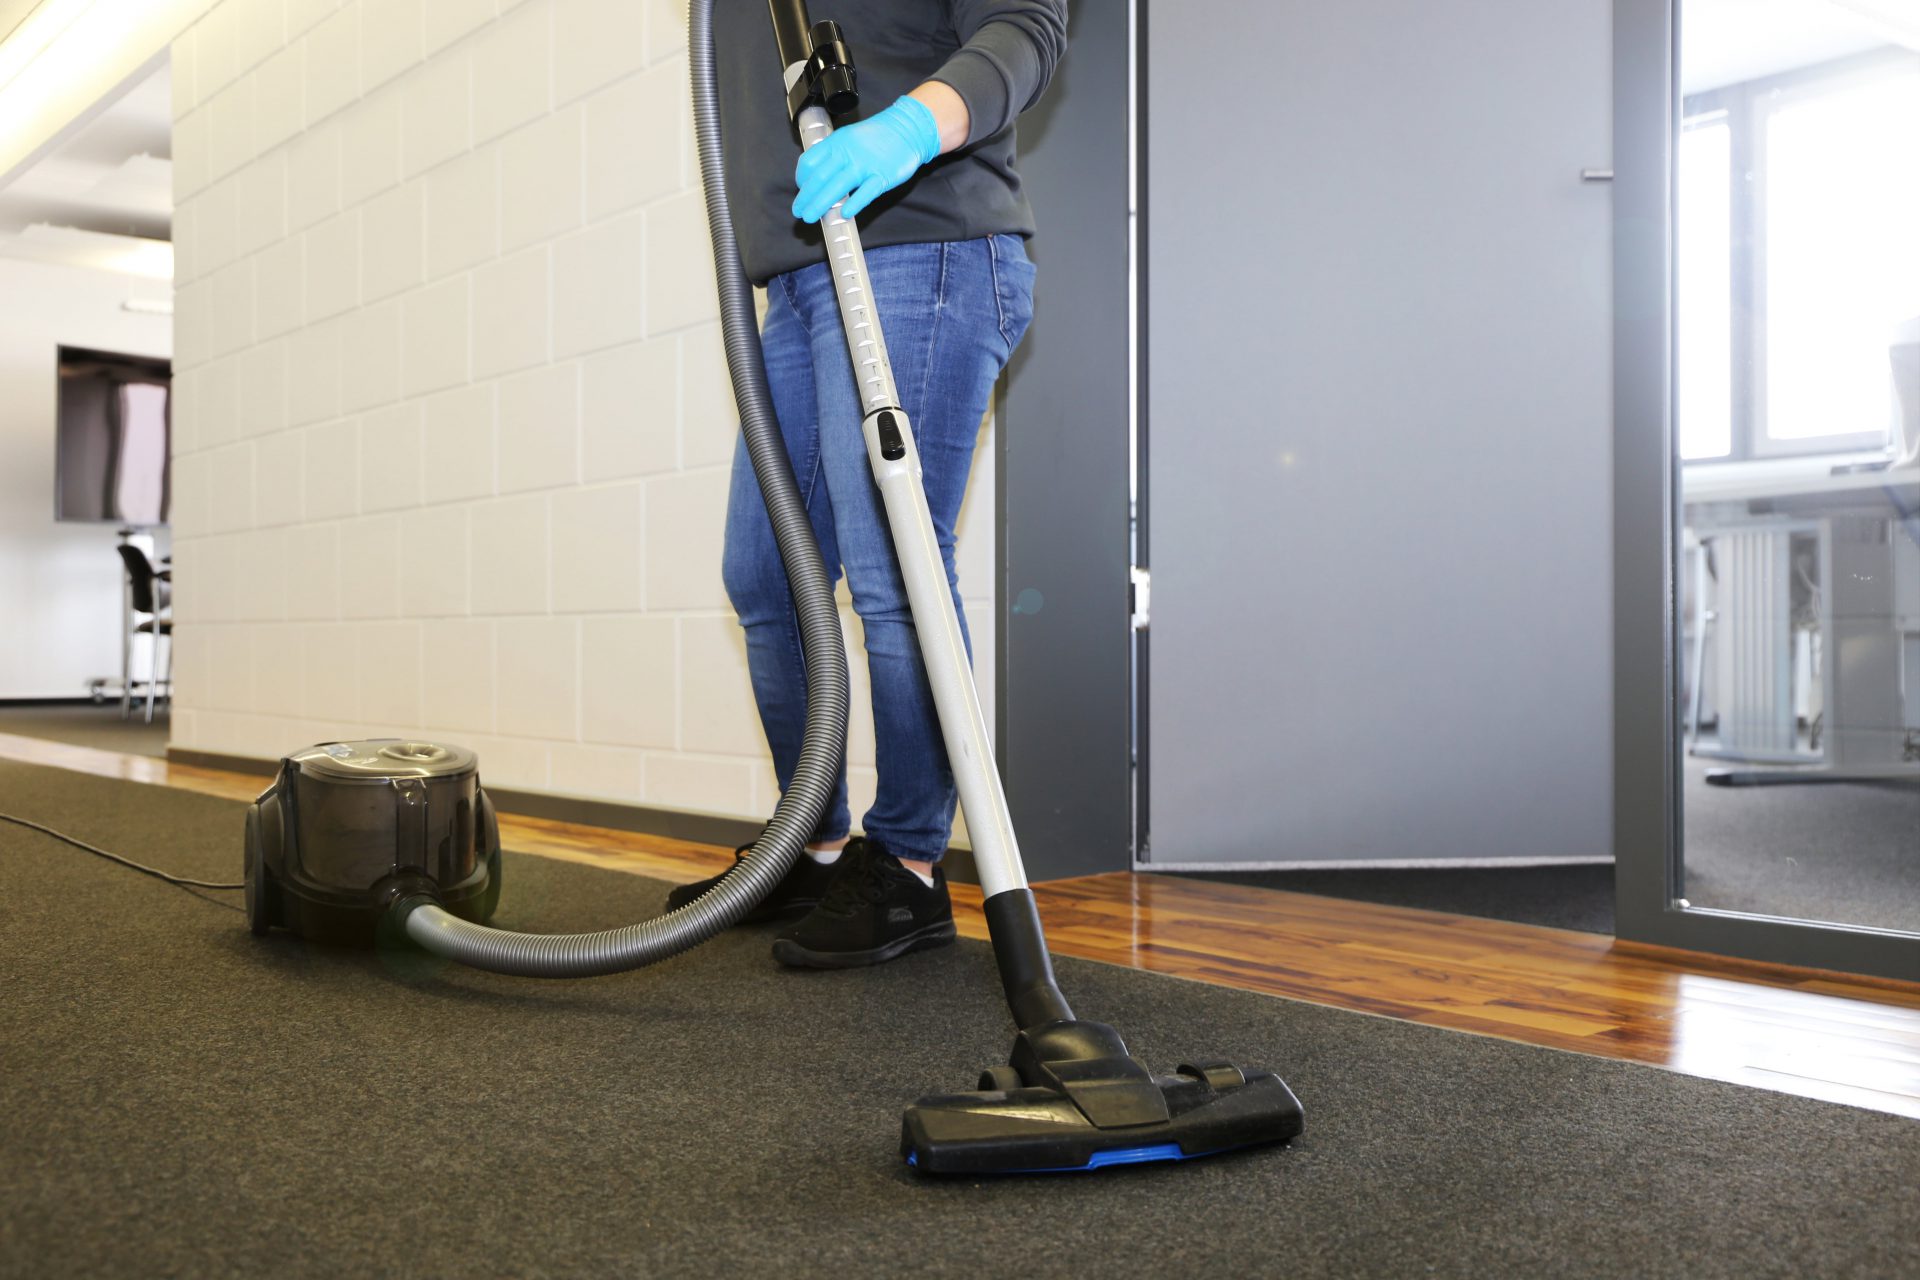 ServiceMaster Carpet Cleaning for Buffalo Grove, IL - Carpet Cleaning